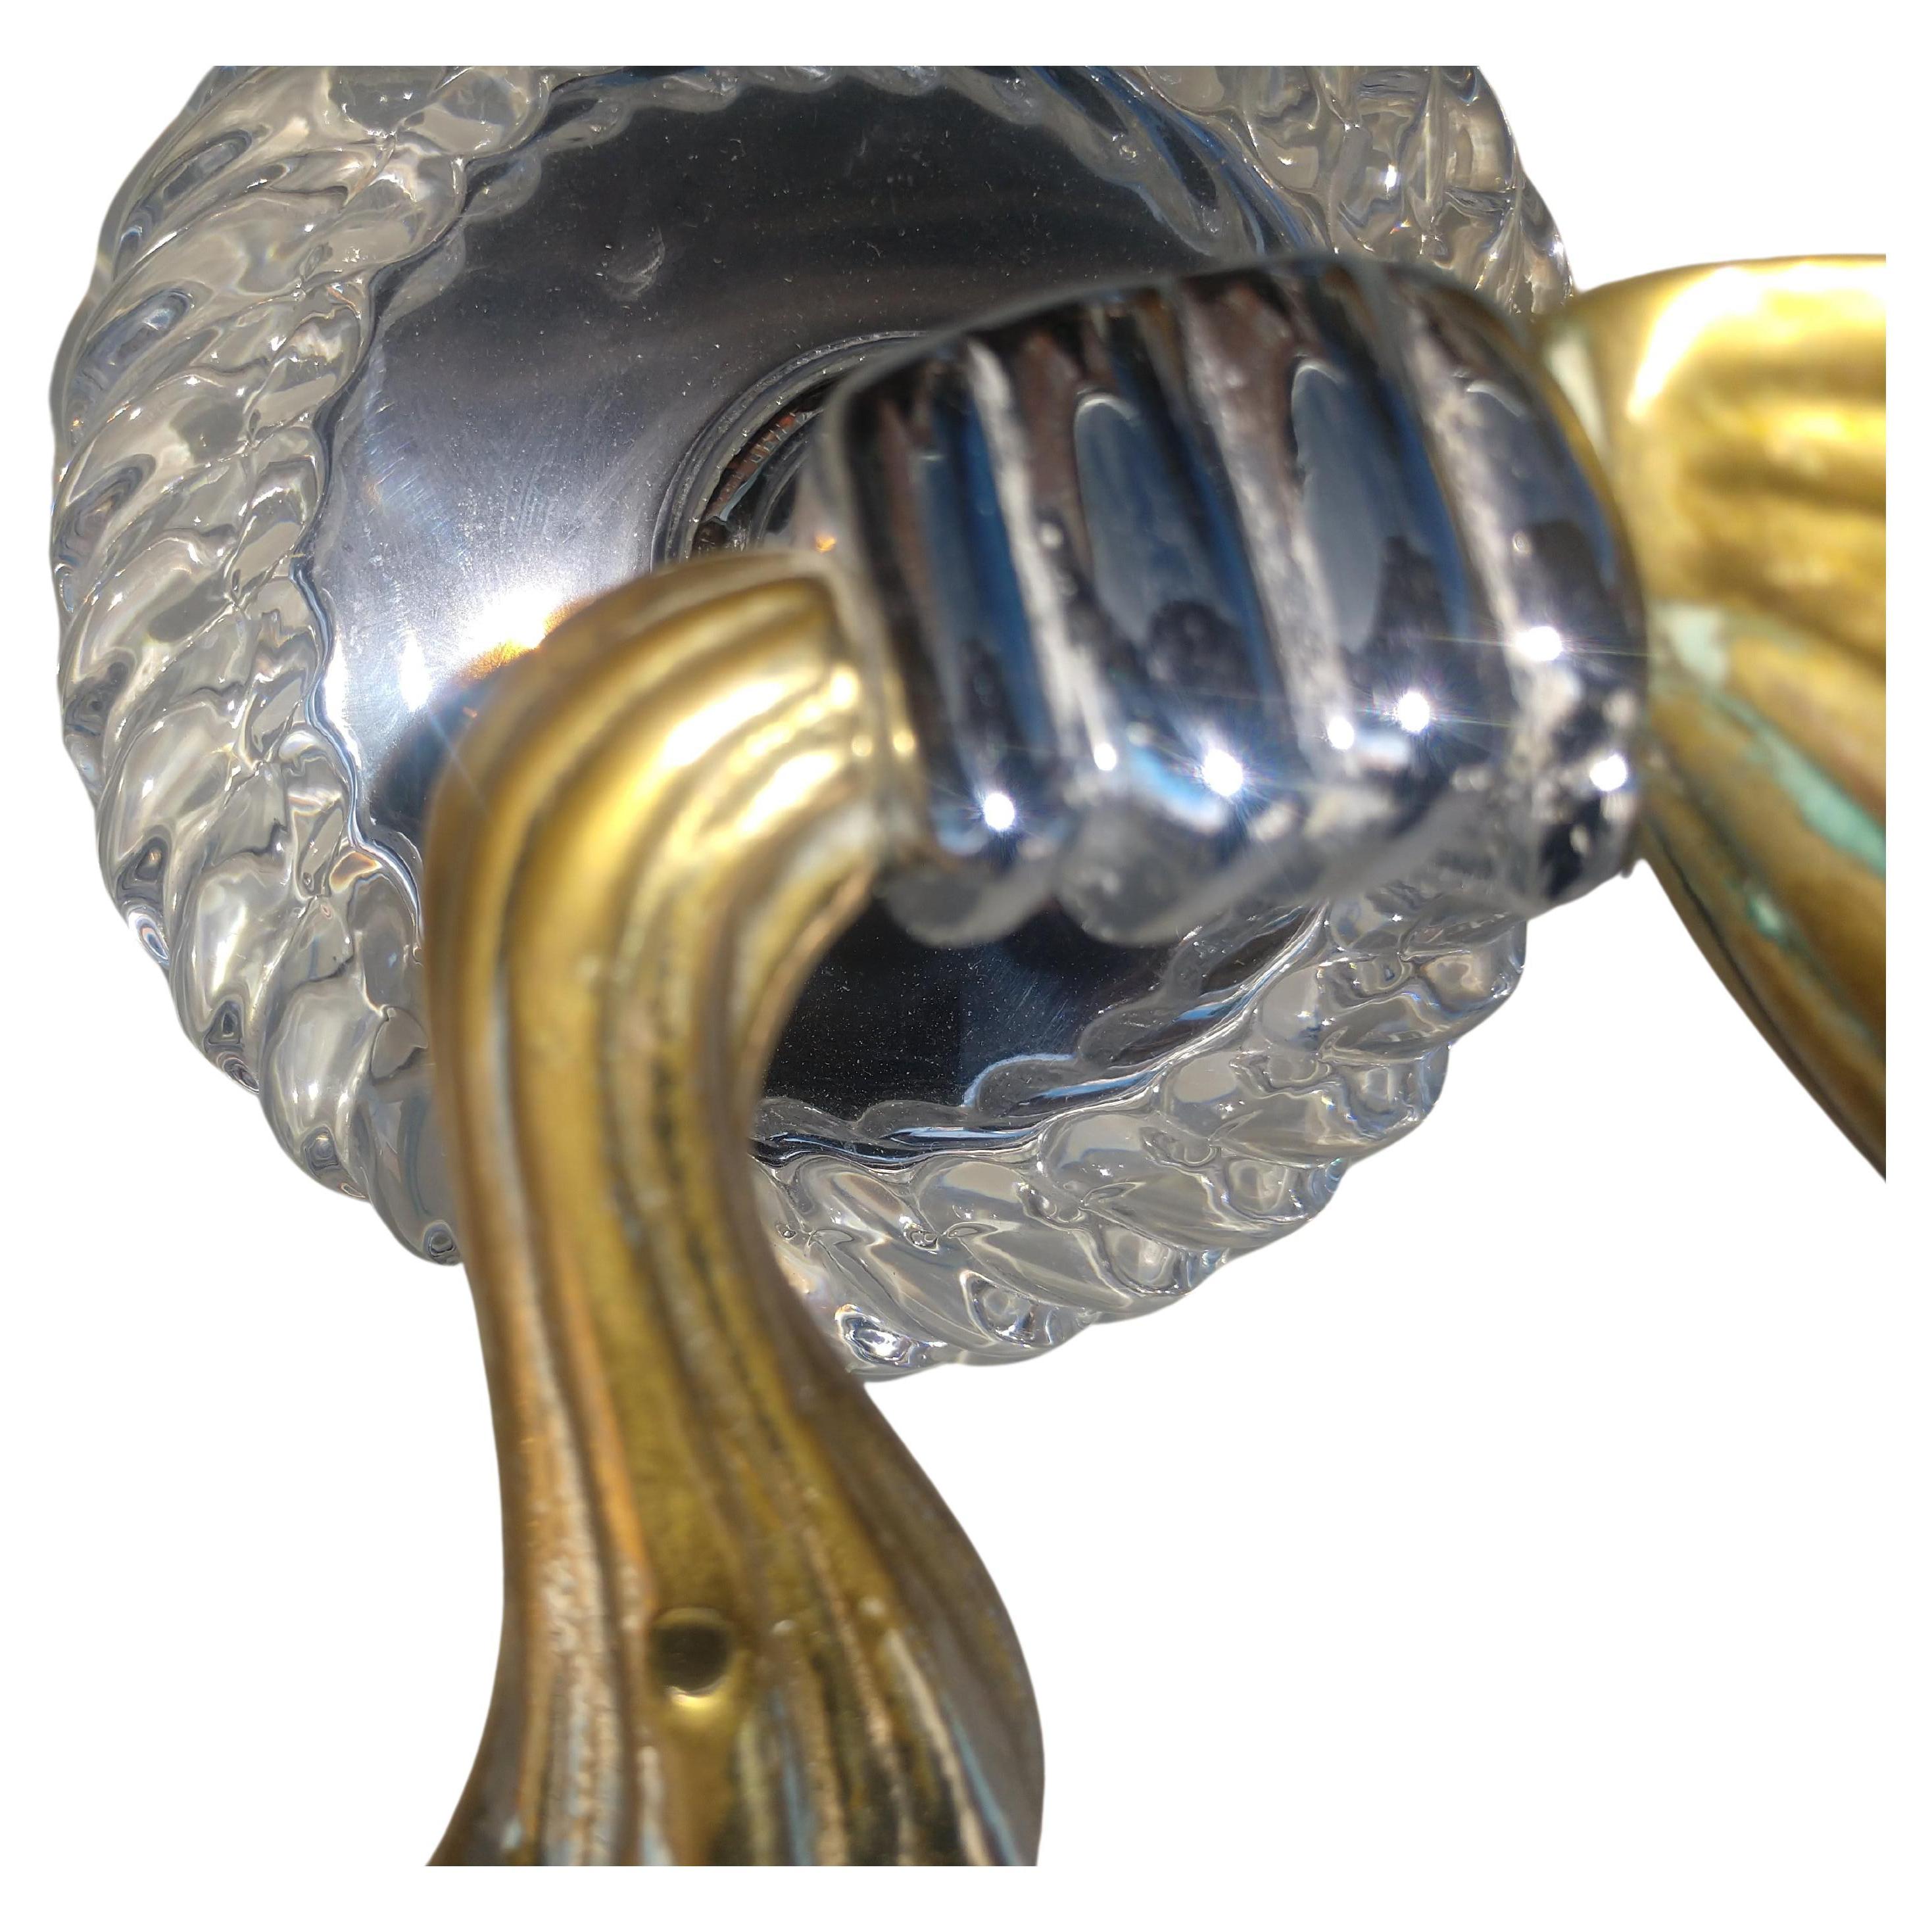 Fabulous pair of very elegant and sophisticated brass, glass and chrome wall sconces. Brass swag drapes which are held by chrome hands and decorated with twisted glass rings. High quality. In excellent vintage condition with minimal wear. Sound